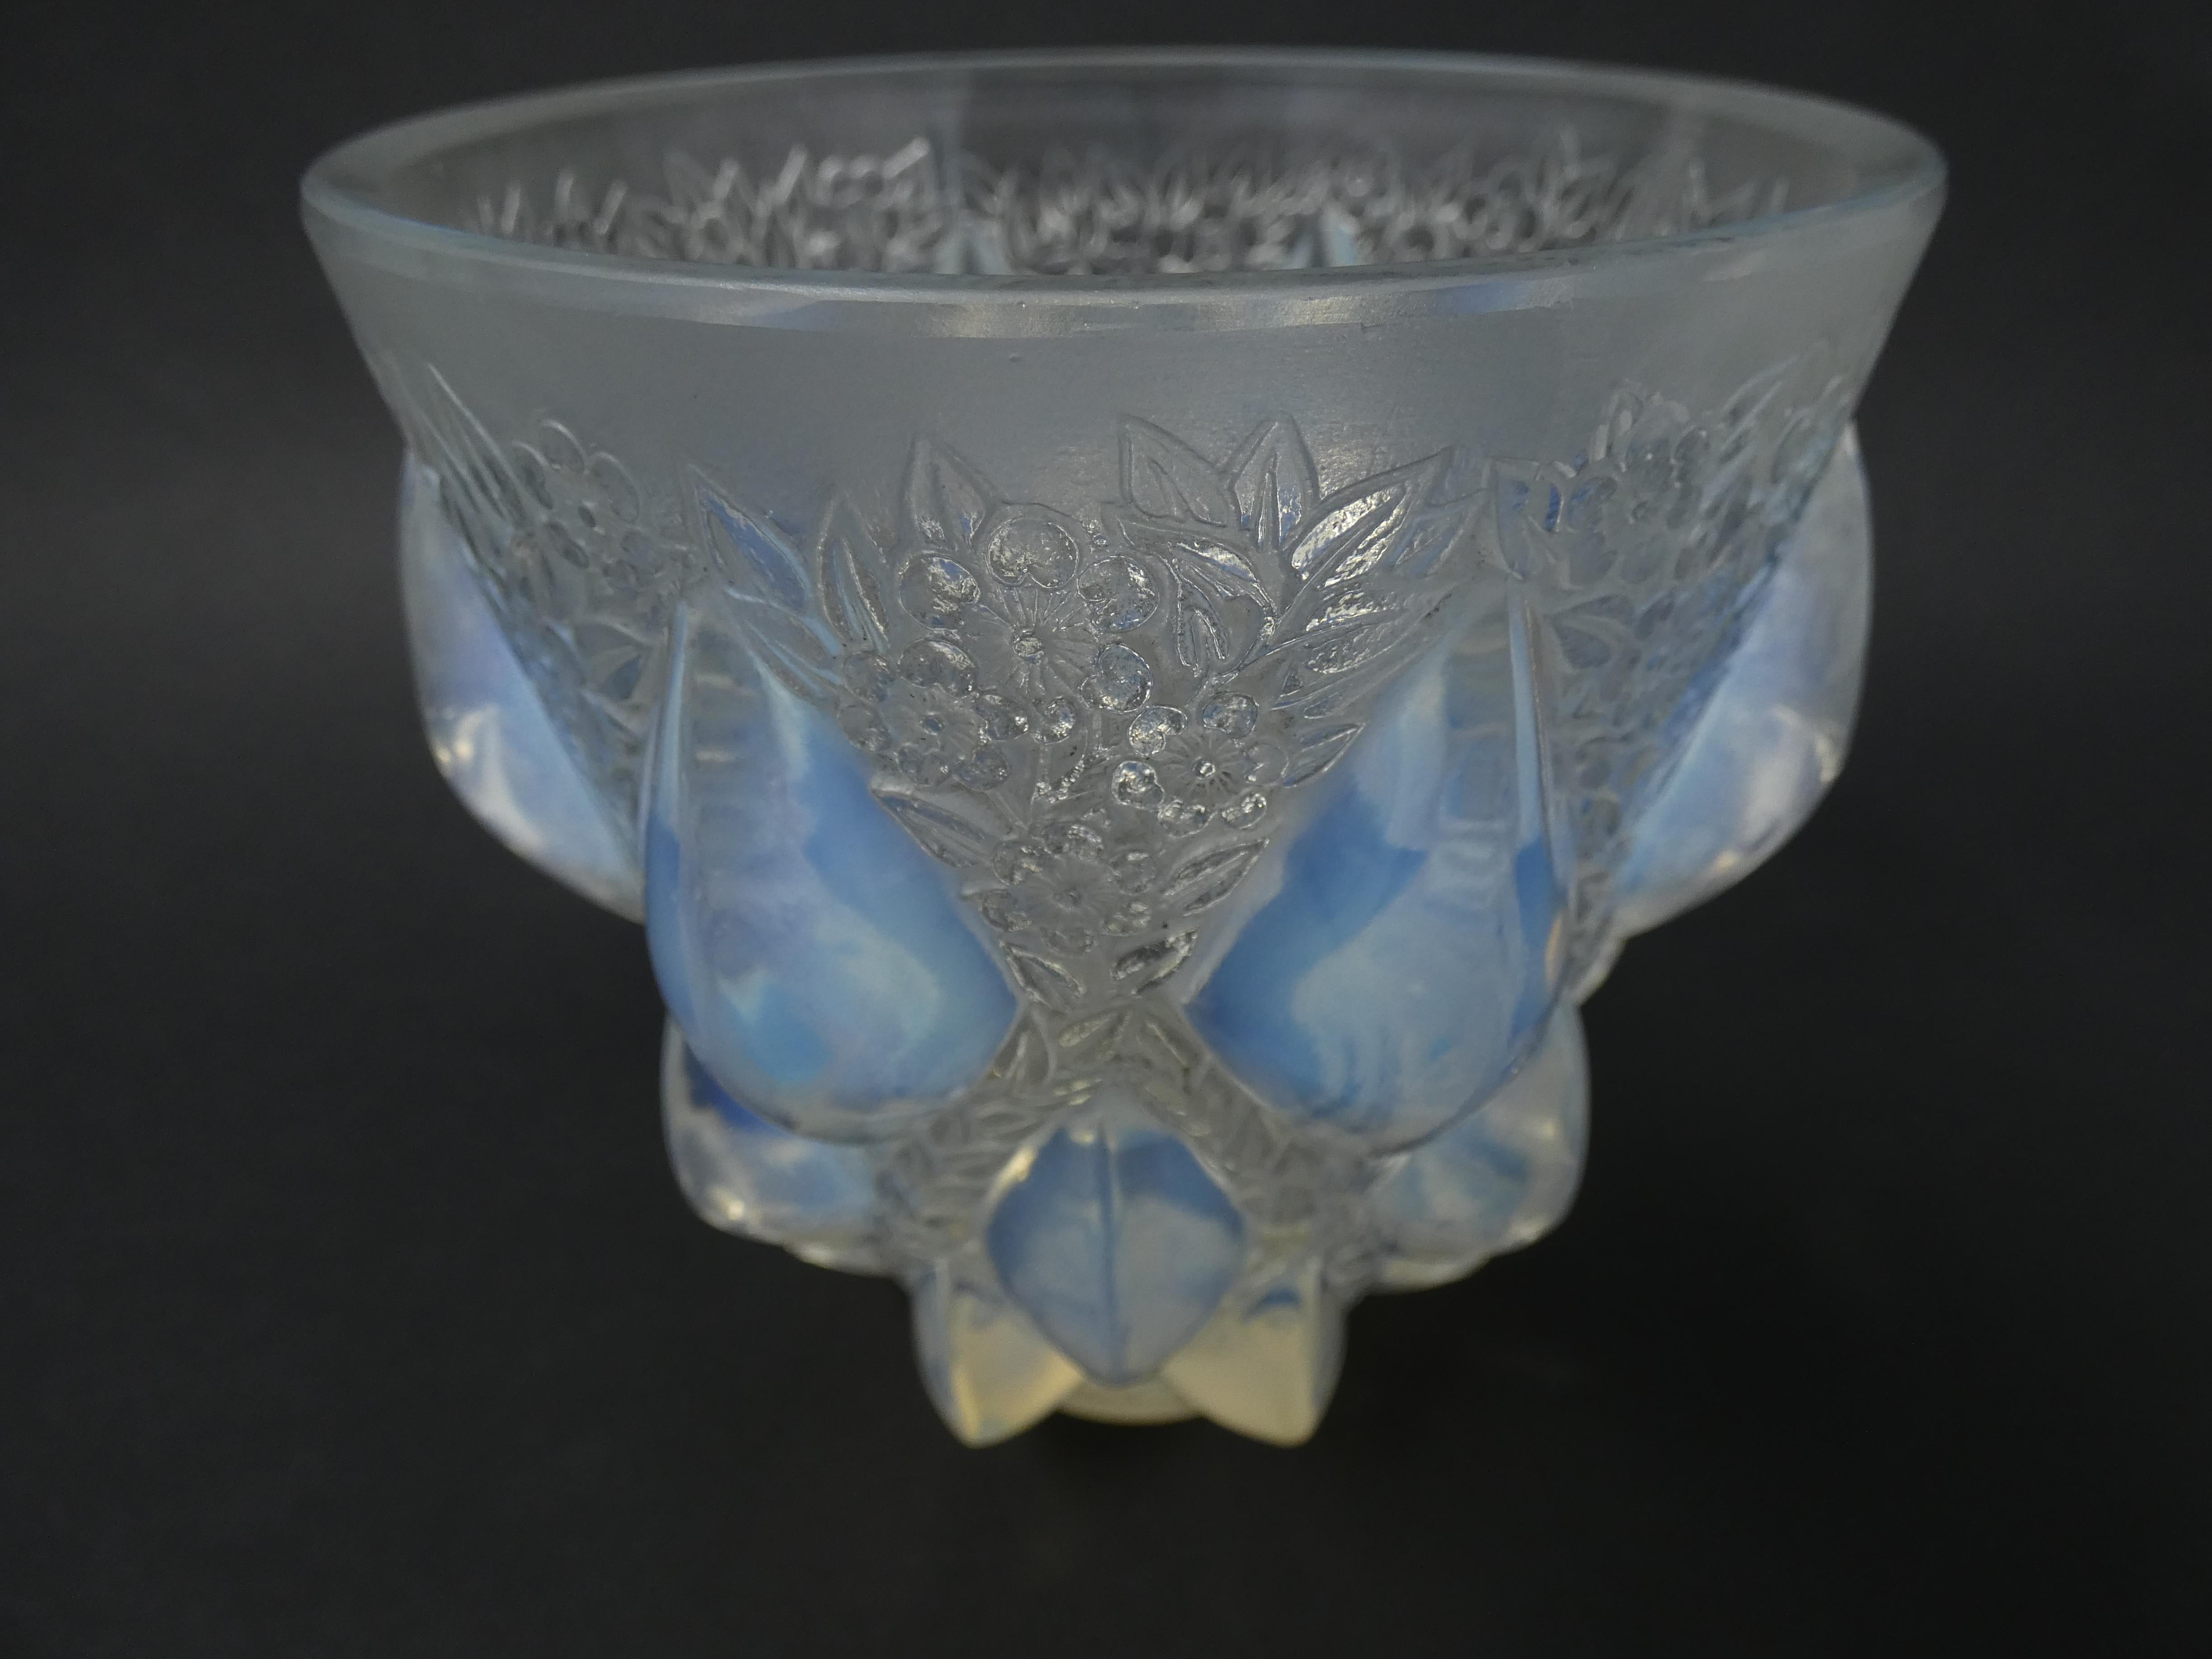 Rene Lalique opalescent glass 'Rampillion' vase. Moulded makers mark, 'R. Lalique '. And stencilled, 'FRANCE'. Book reference: Marcilhac 991.